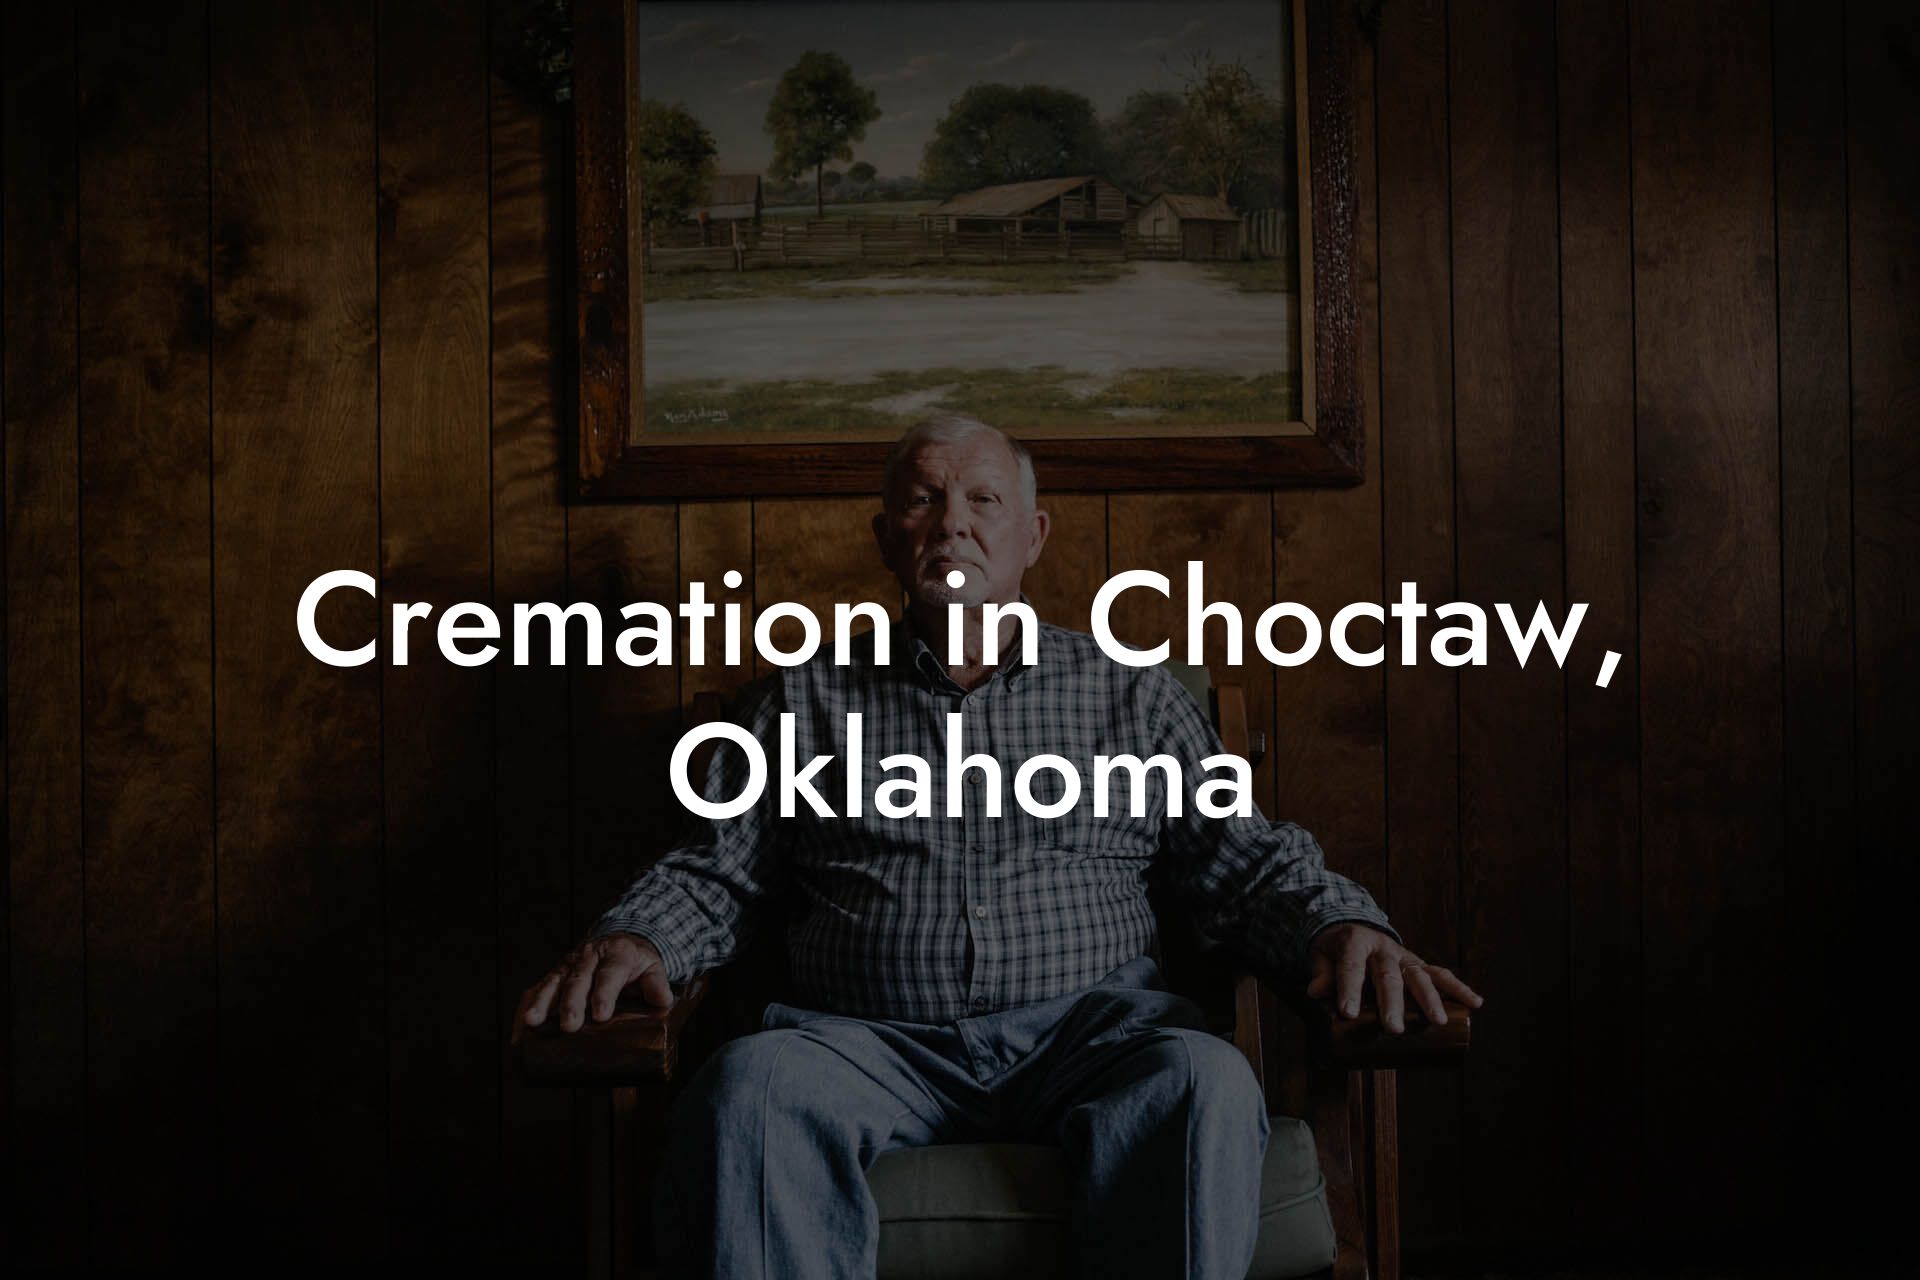 Cremation in Choctaw, Oklahoma